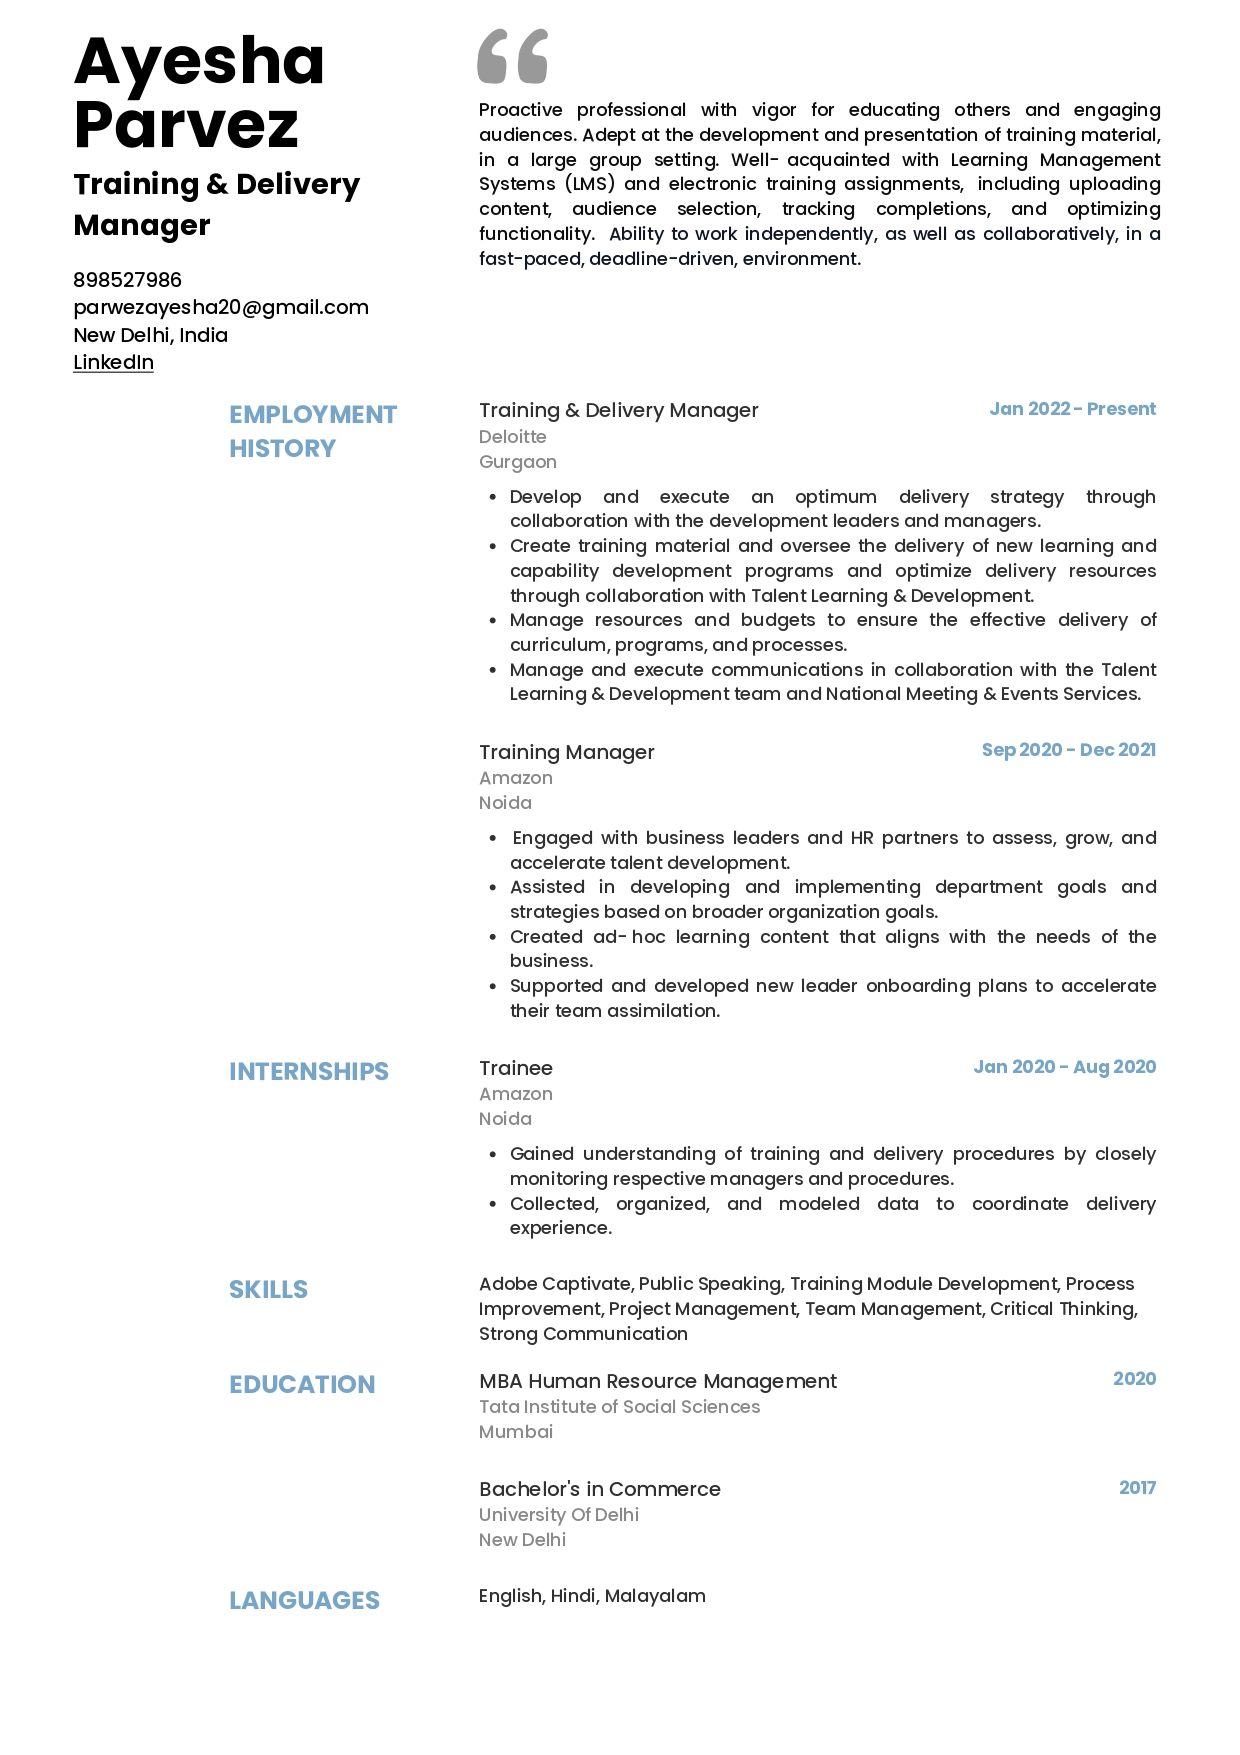 Resume of Training & Delivery Manager